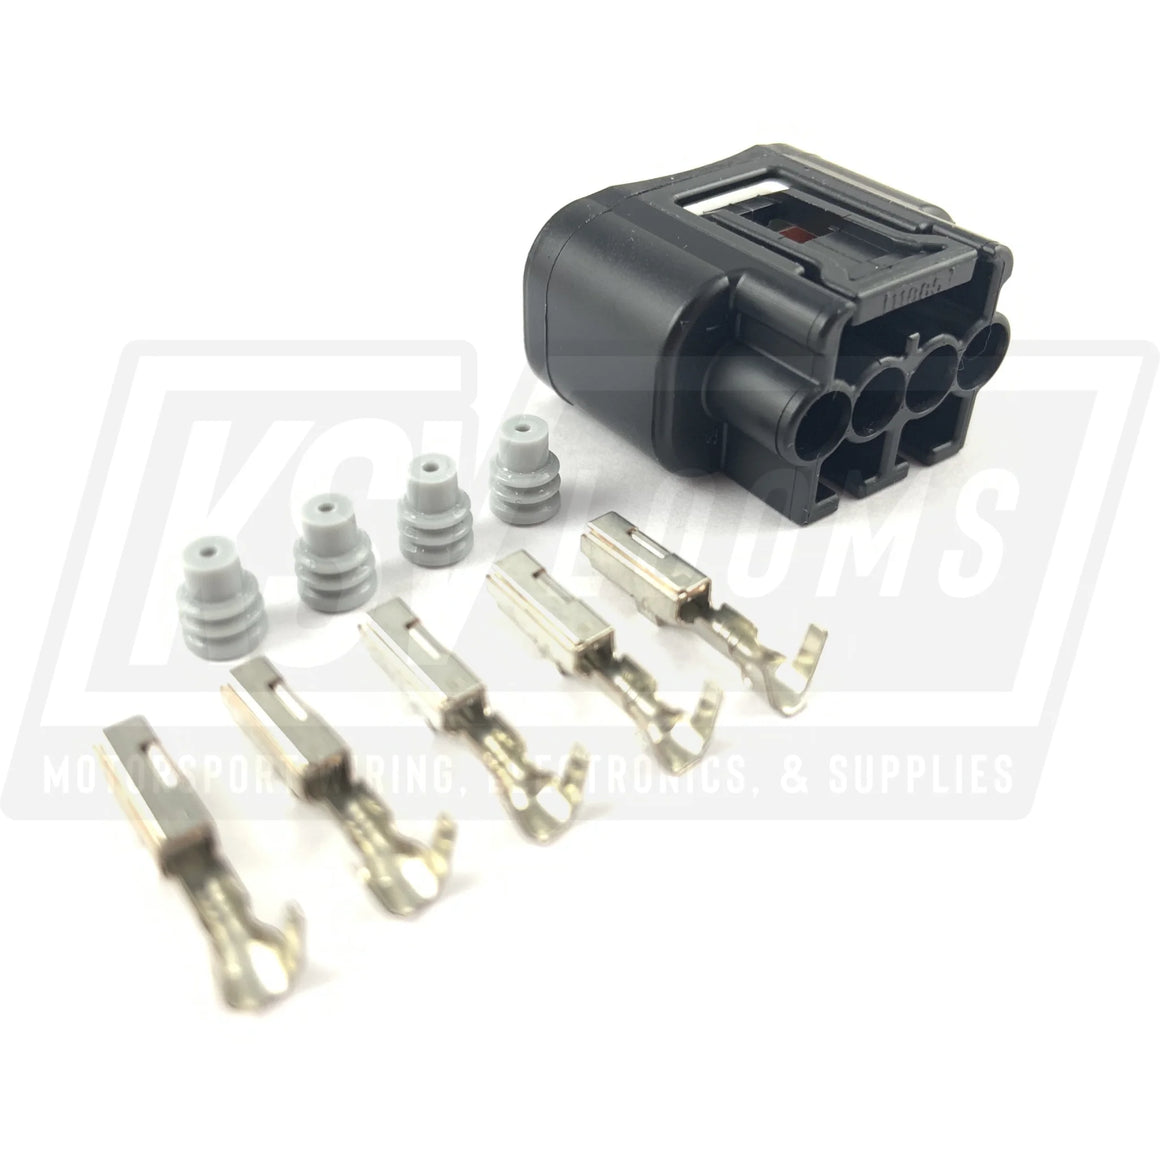 4-Way Connector Kit For Toyota Denso 90919-02238 Ignition Coil (22-20 Awg)